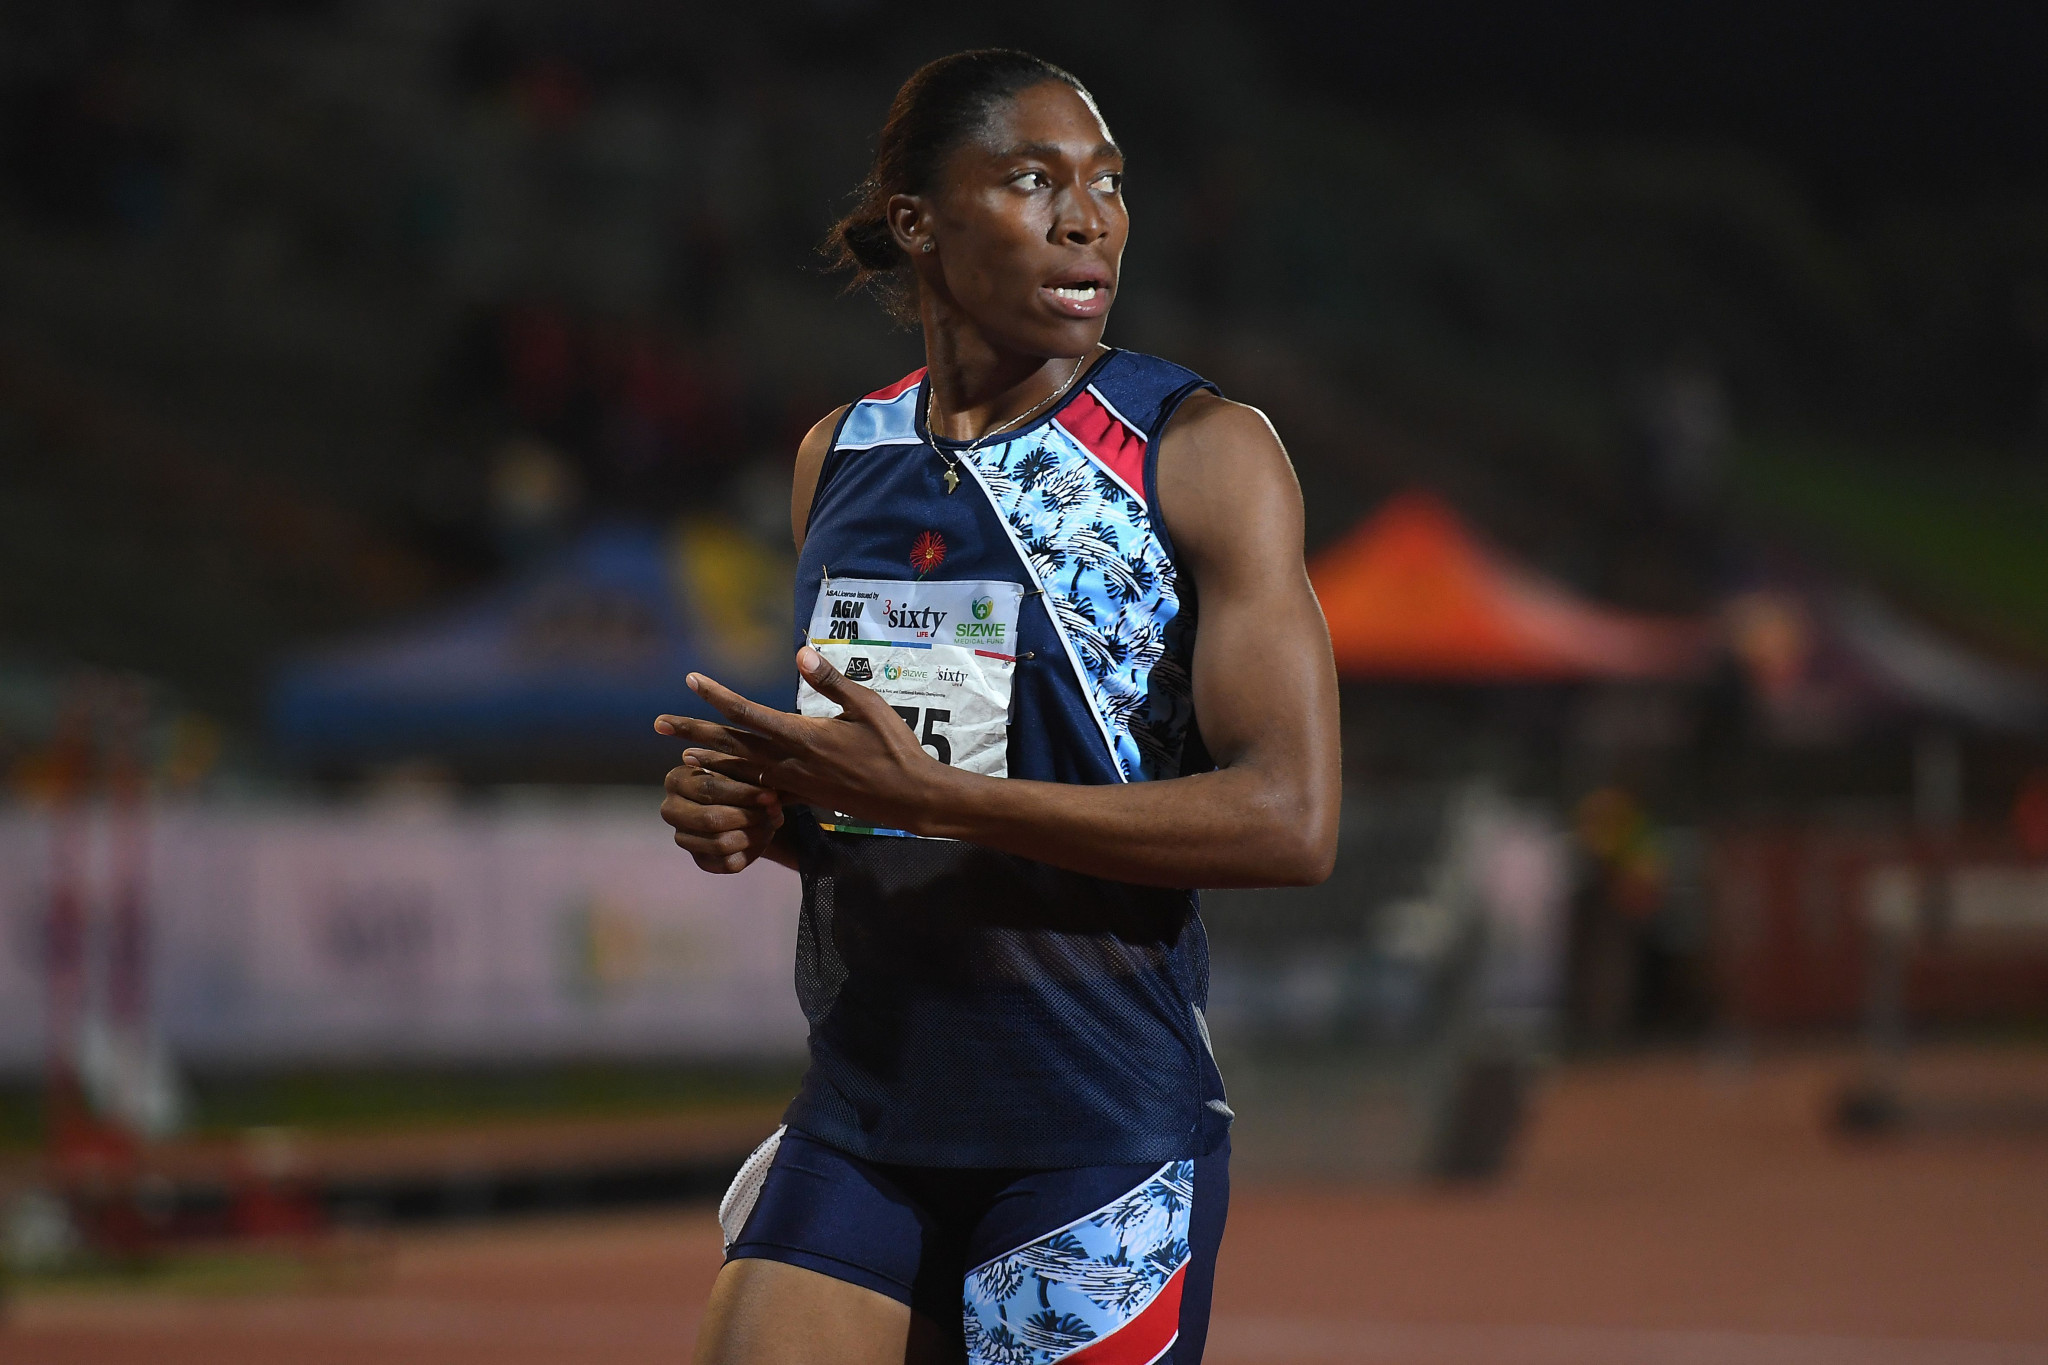 Scotland’s Liz McColgan and Ireland’s Sonia O'Sullivan are among those to have expressed their support for the Court of Arbitration for Sport’s controversial decision on the landmark case involving Caster Semenya, pictured, and the IAAF ©Getty Images